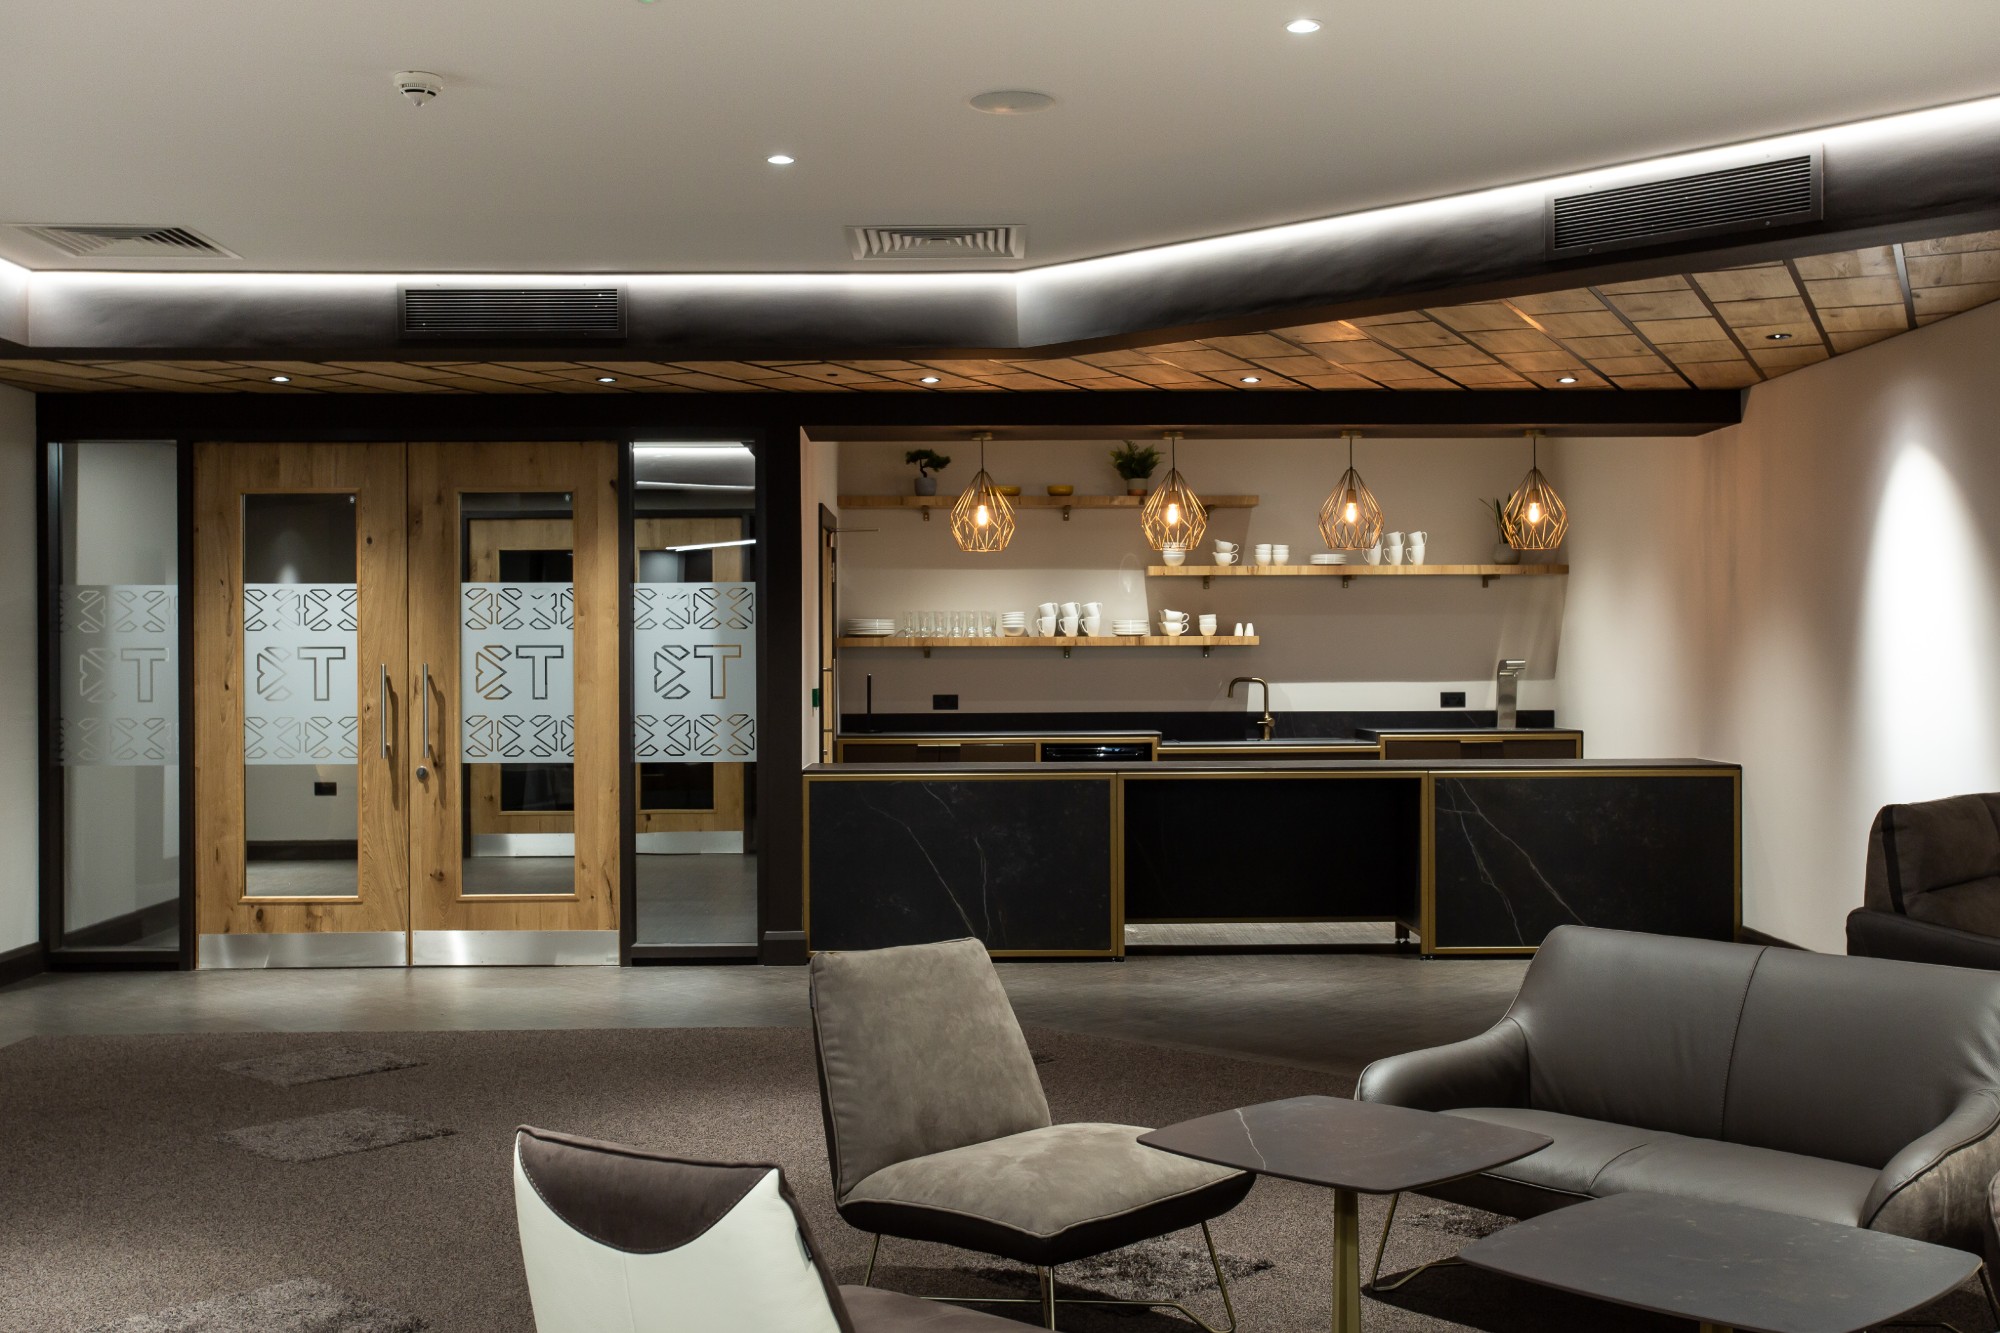 Image of vicryn 70 in Dekton, the premium finish of choice for a brand-new, innovative conference and event centre in Northern Ireland - Cosentino